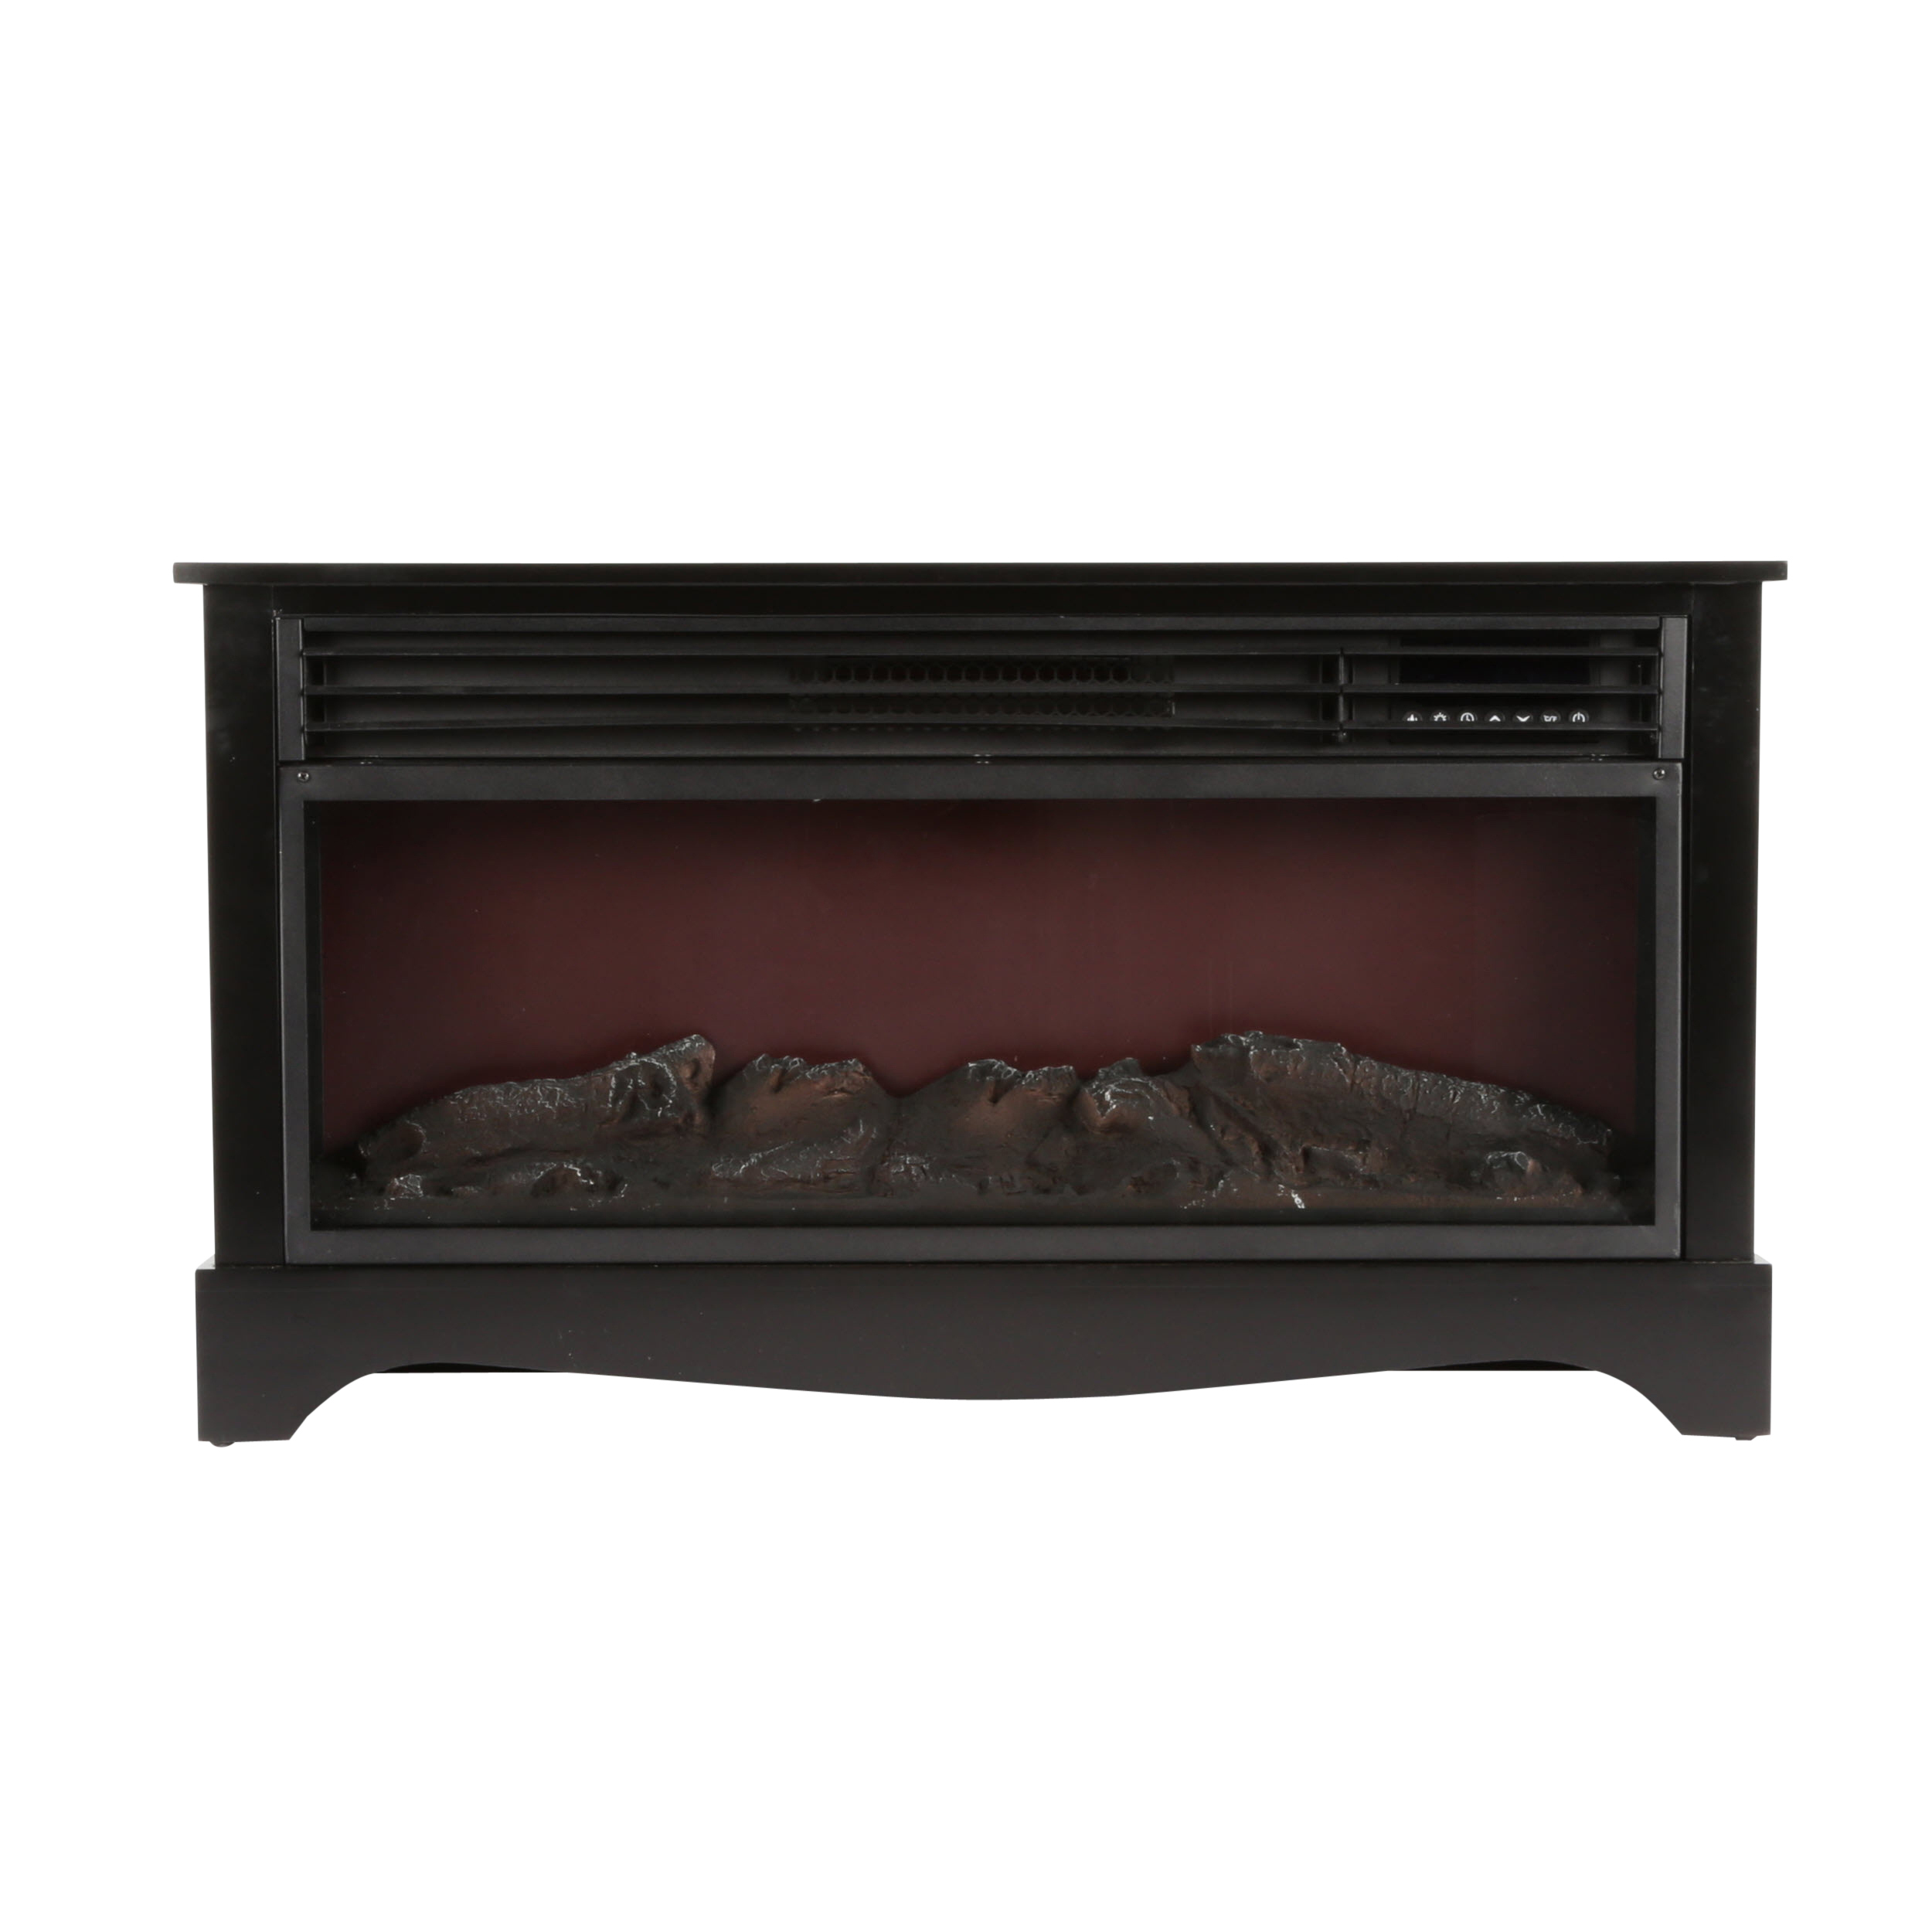 Lifesource 20" Tall Heater Fireplace with Color-Change LED Affect, Black Cabinet - image 2 of 5